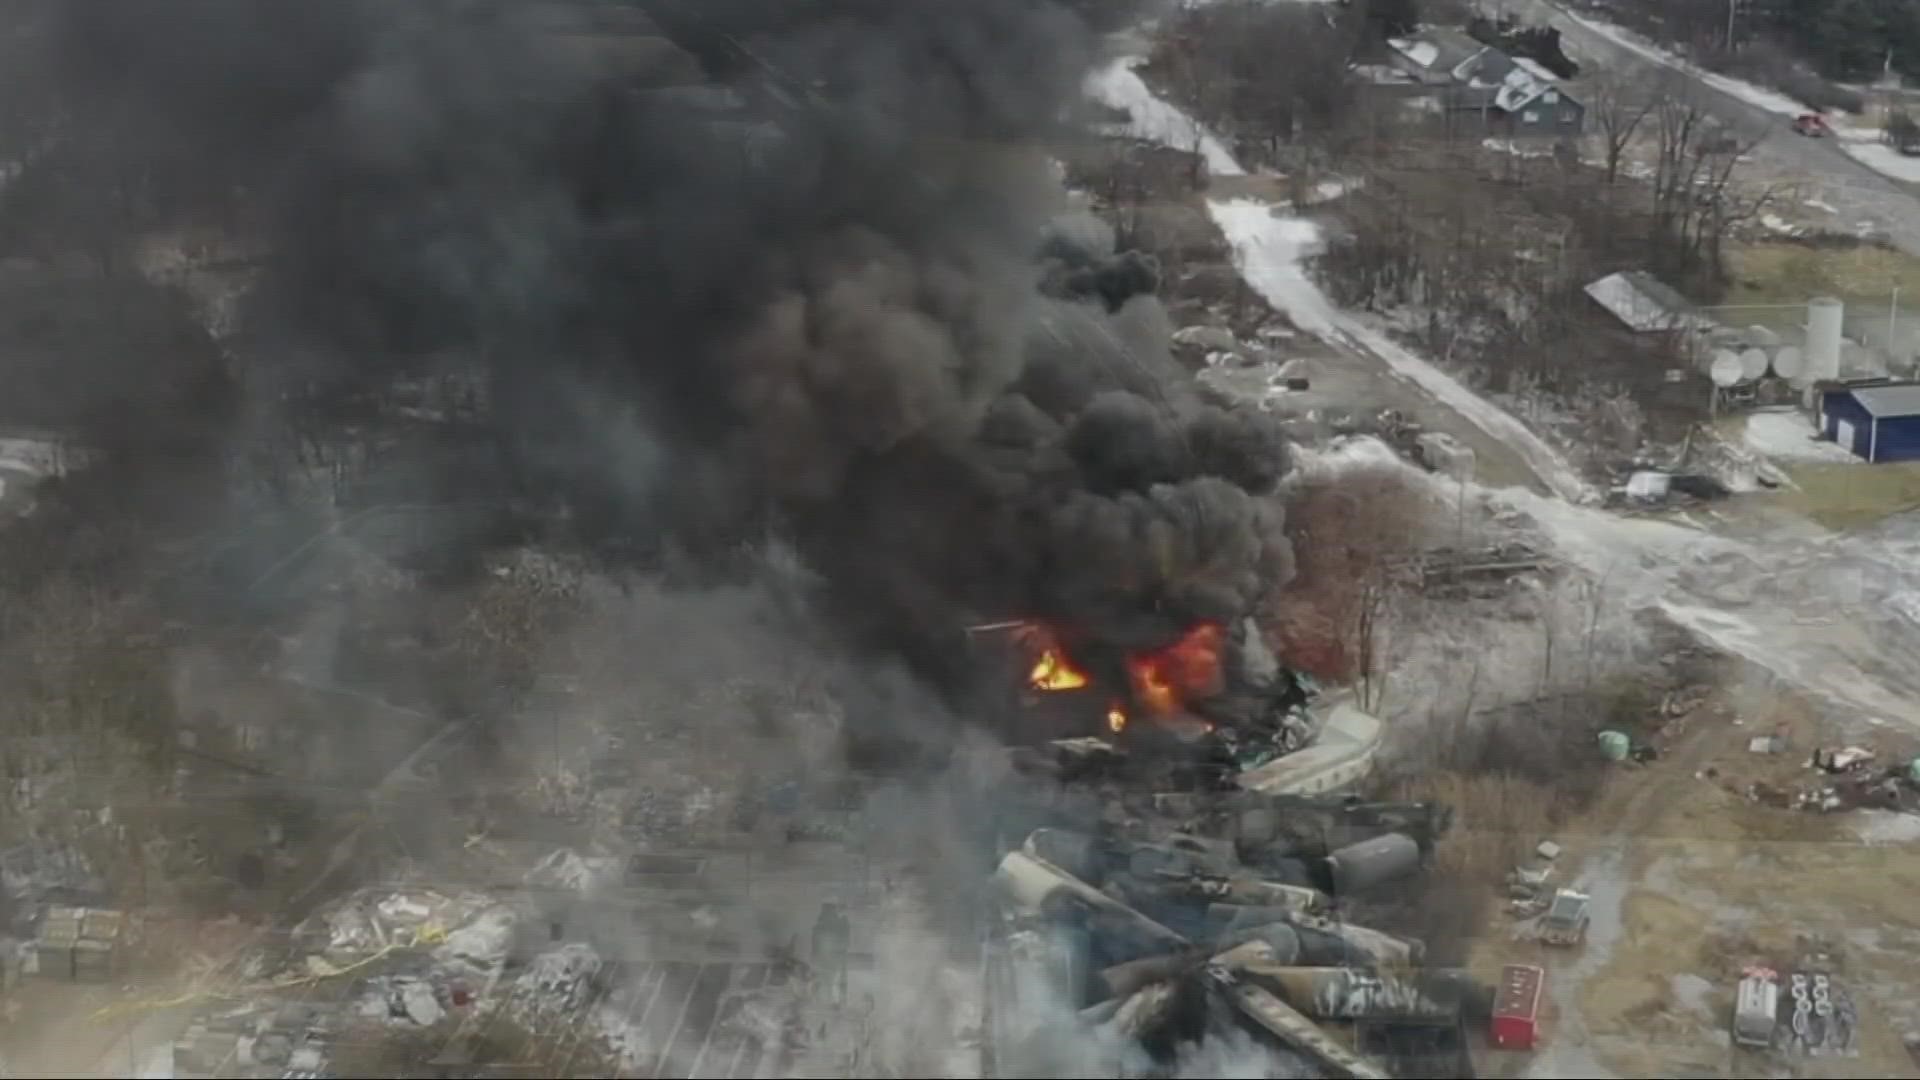 Officials are investigating after a massive fire sparked following a train derailment in East Palestine, Ohio.